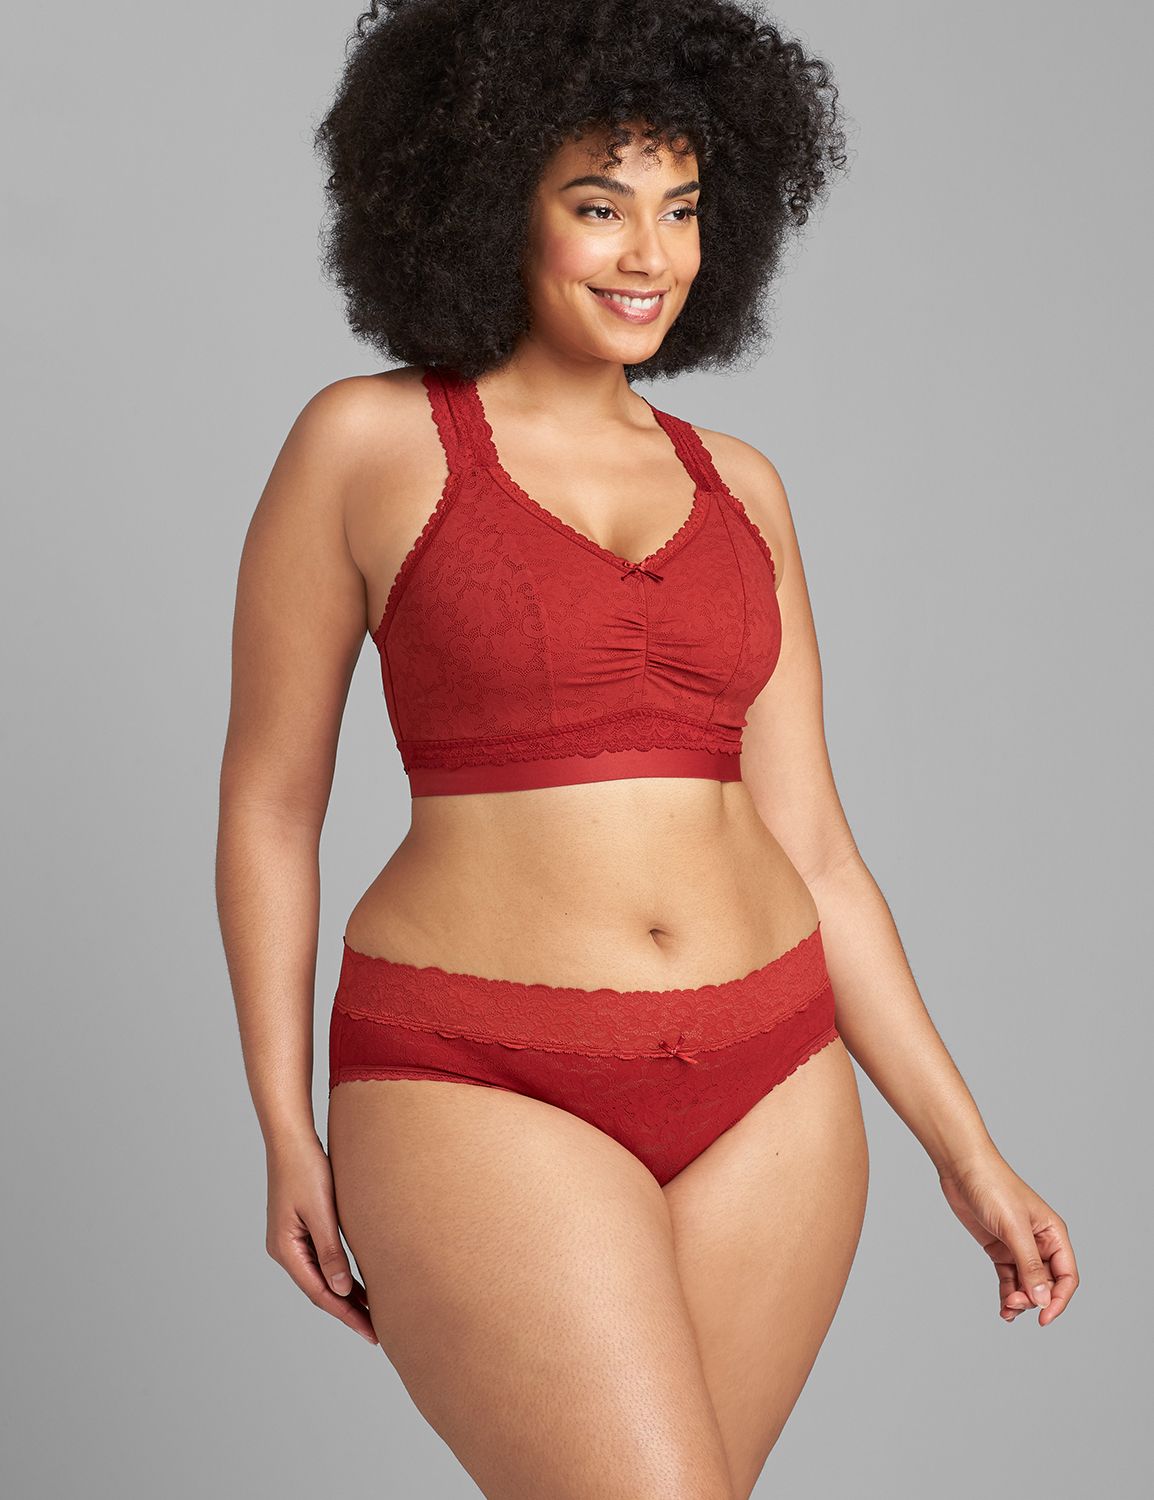 Bright red padded bralette bra with lace and designer back - La Amara